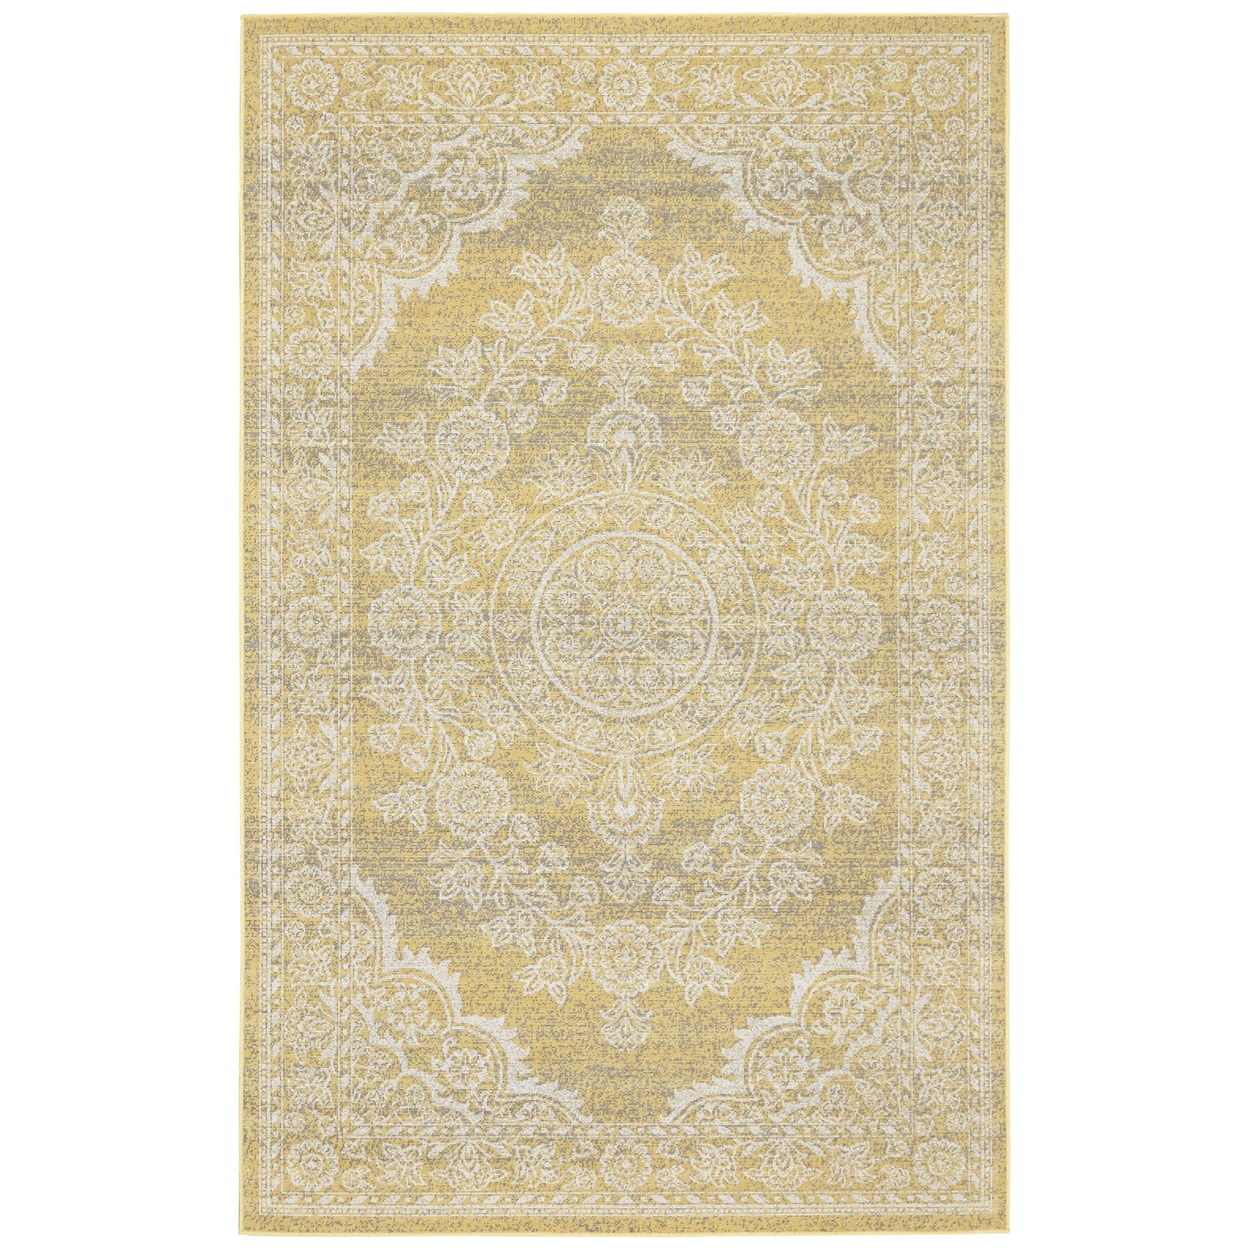 Feizy Rugs Thatcher Straw 2'-2" x 4' Area Rug